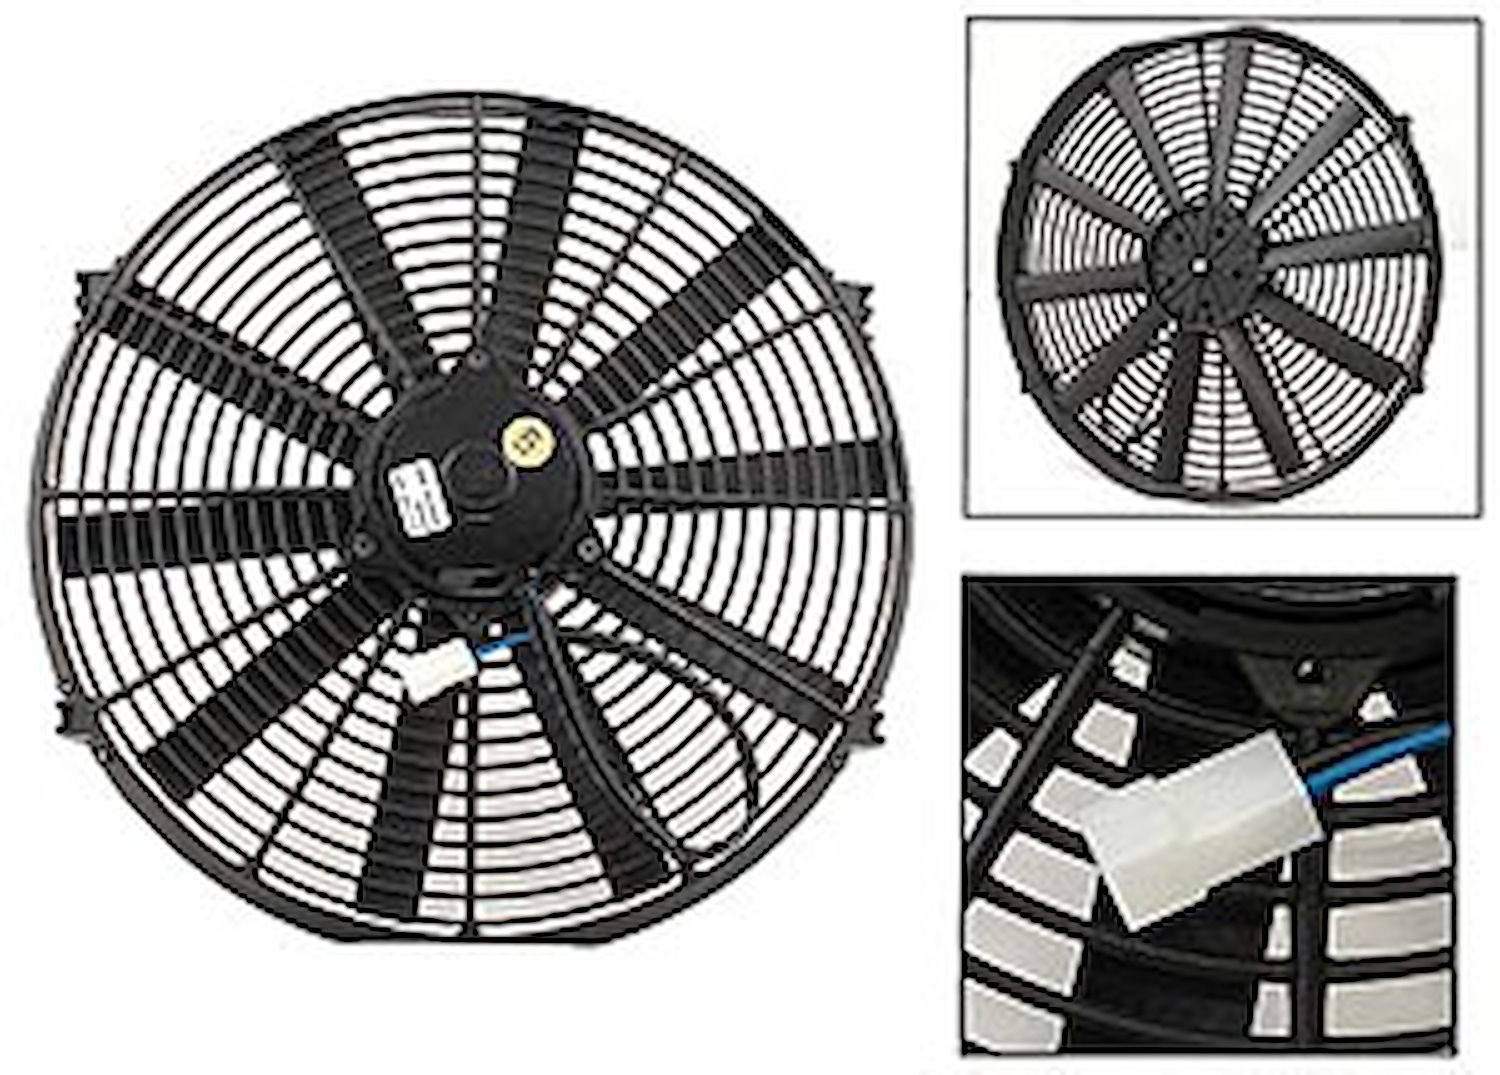 16" Electric Fan: Thickness 3.47"  2000 CFM  1900 RPM  11.4 amp draw